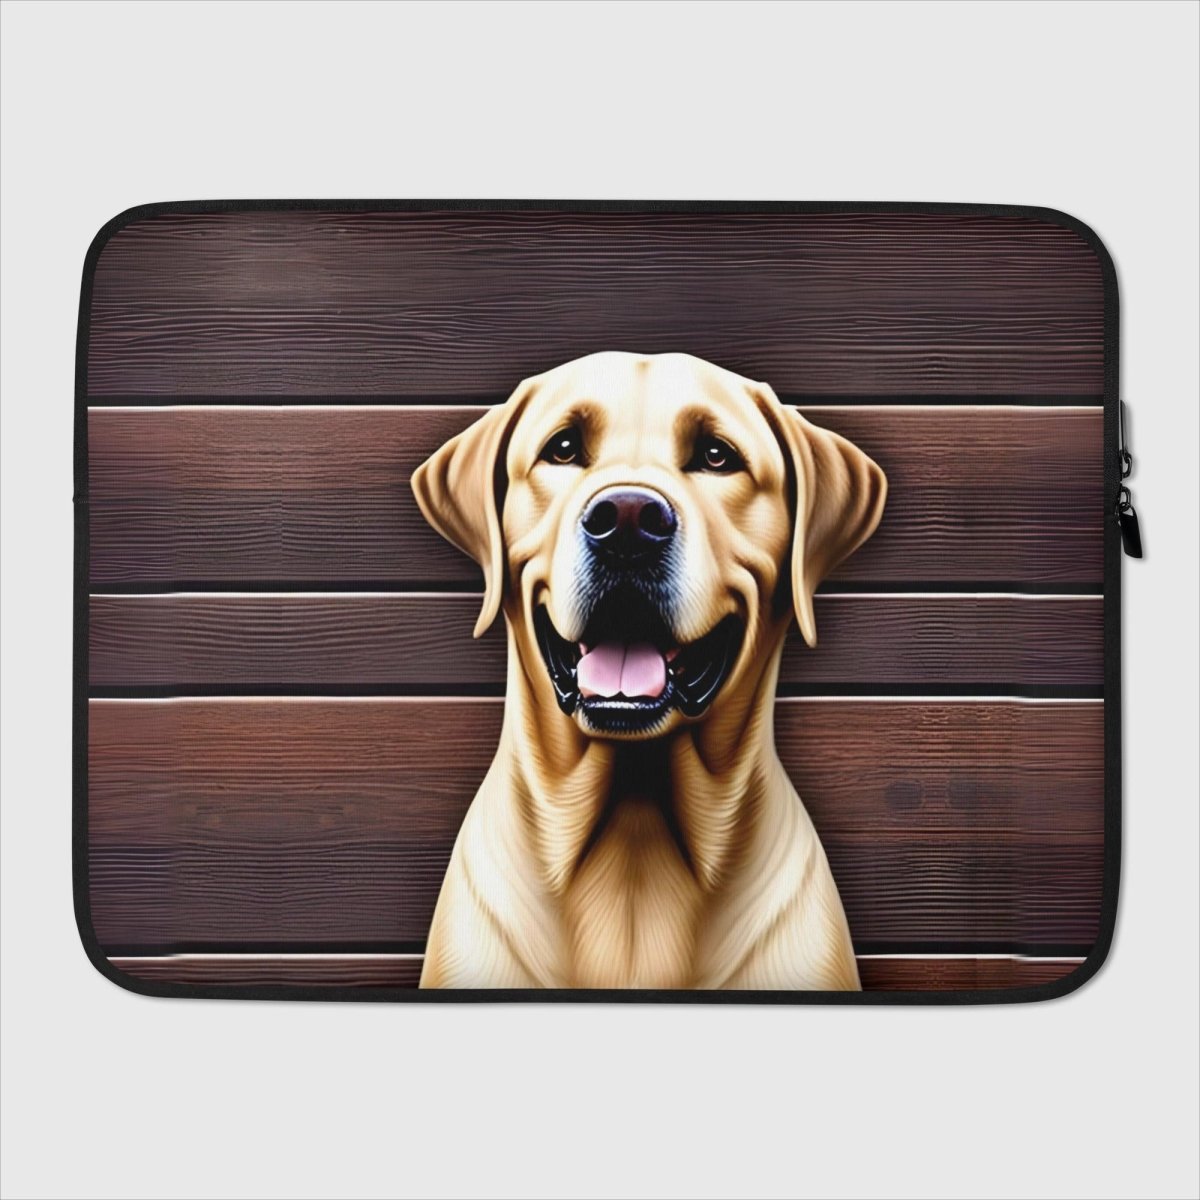 White Labrador by the Fence Laptop Sleeve - Funny Nikko